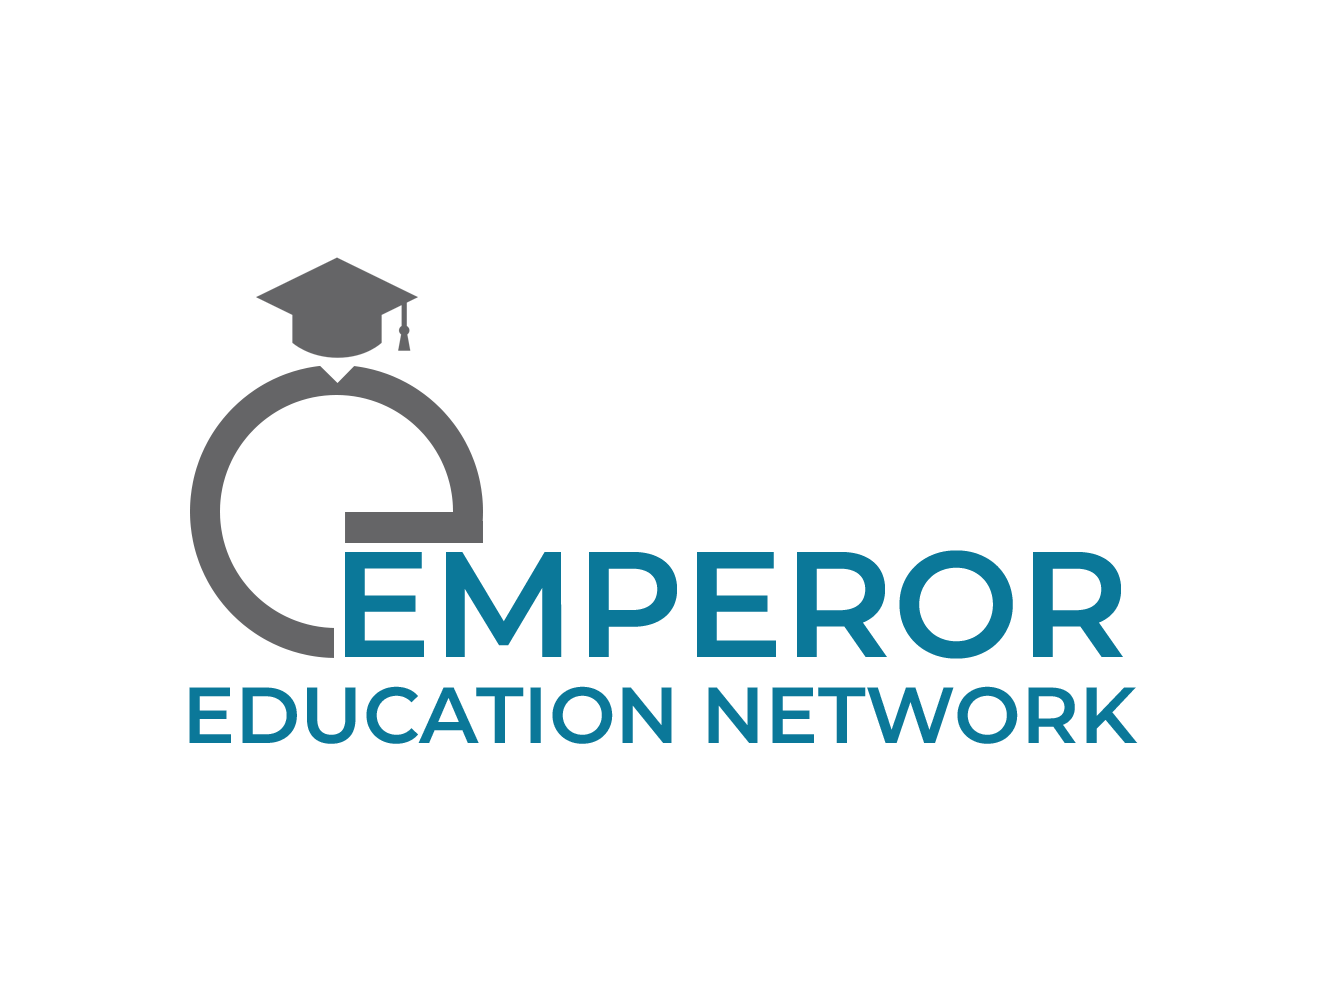 Why to choose Emperor Education Network?